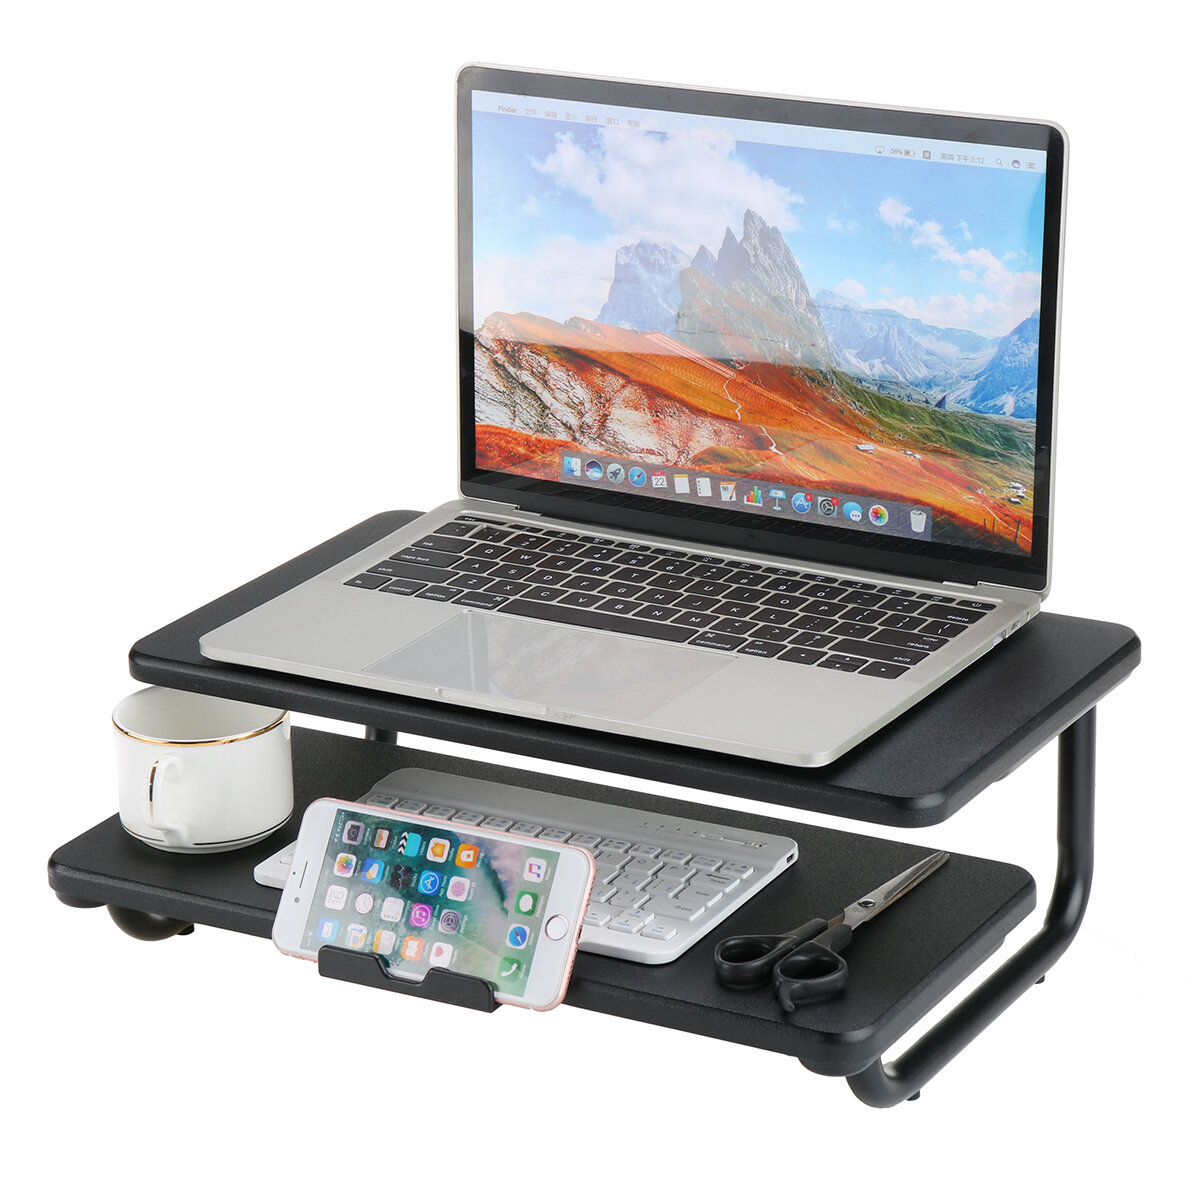 Image of Multifunction Double-Layer Monitor Riser Macbook Desktop Stand Organizer with Mobile Phone Holder